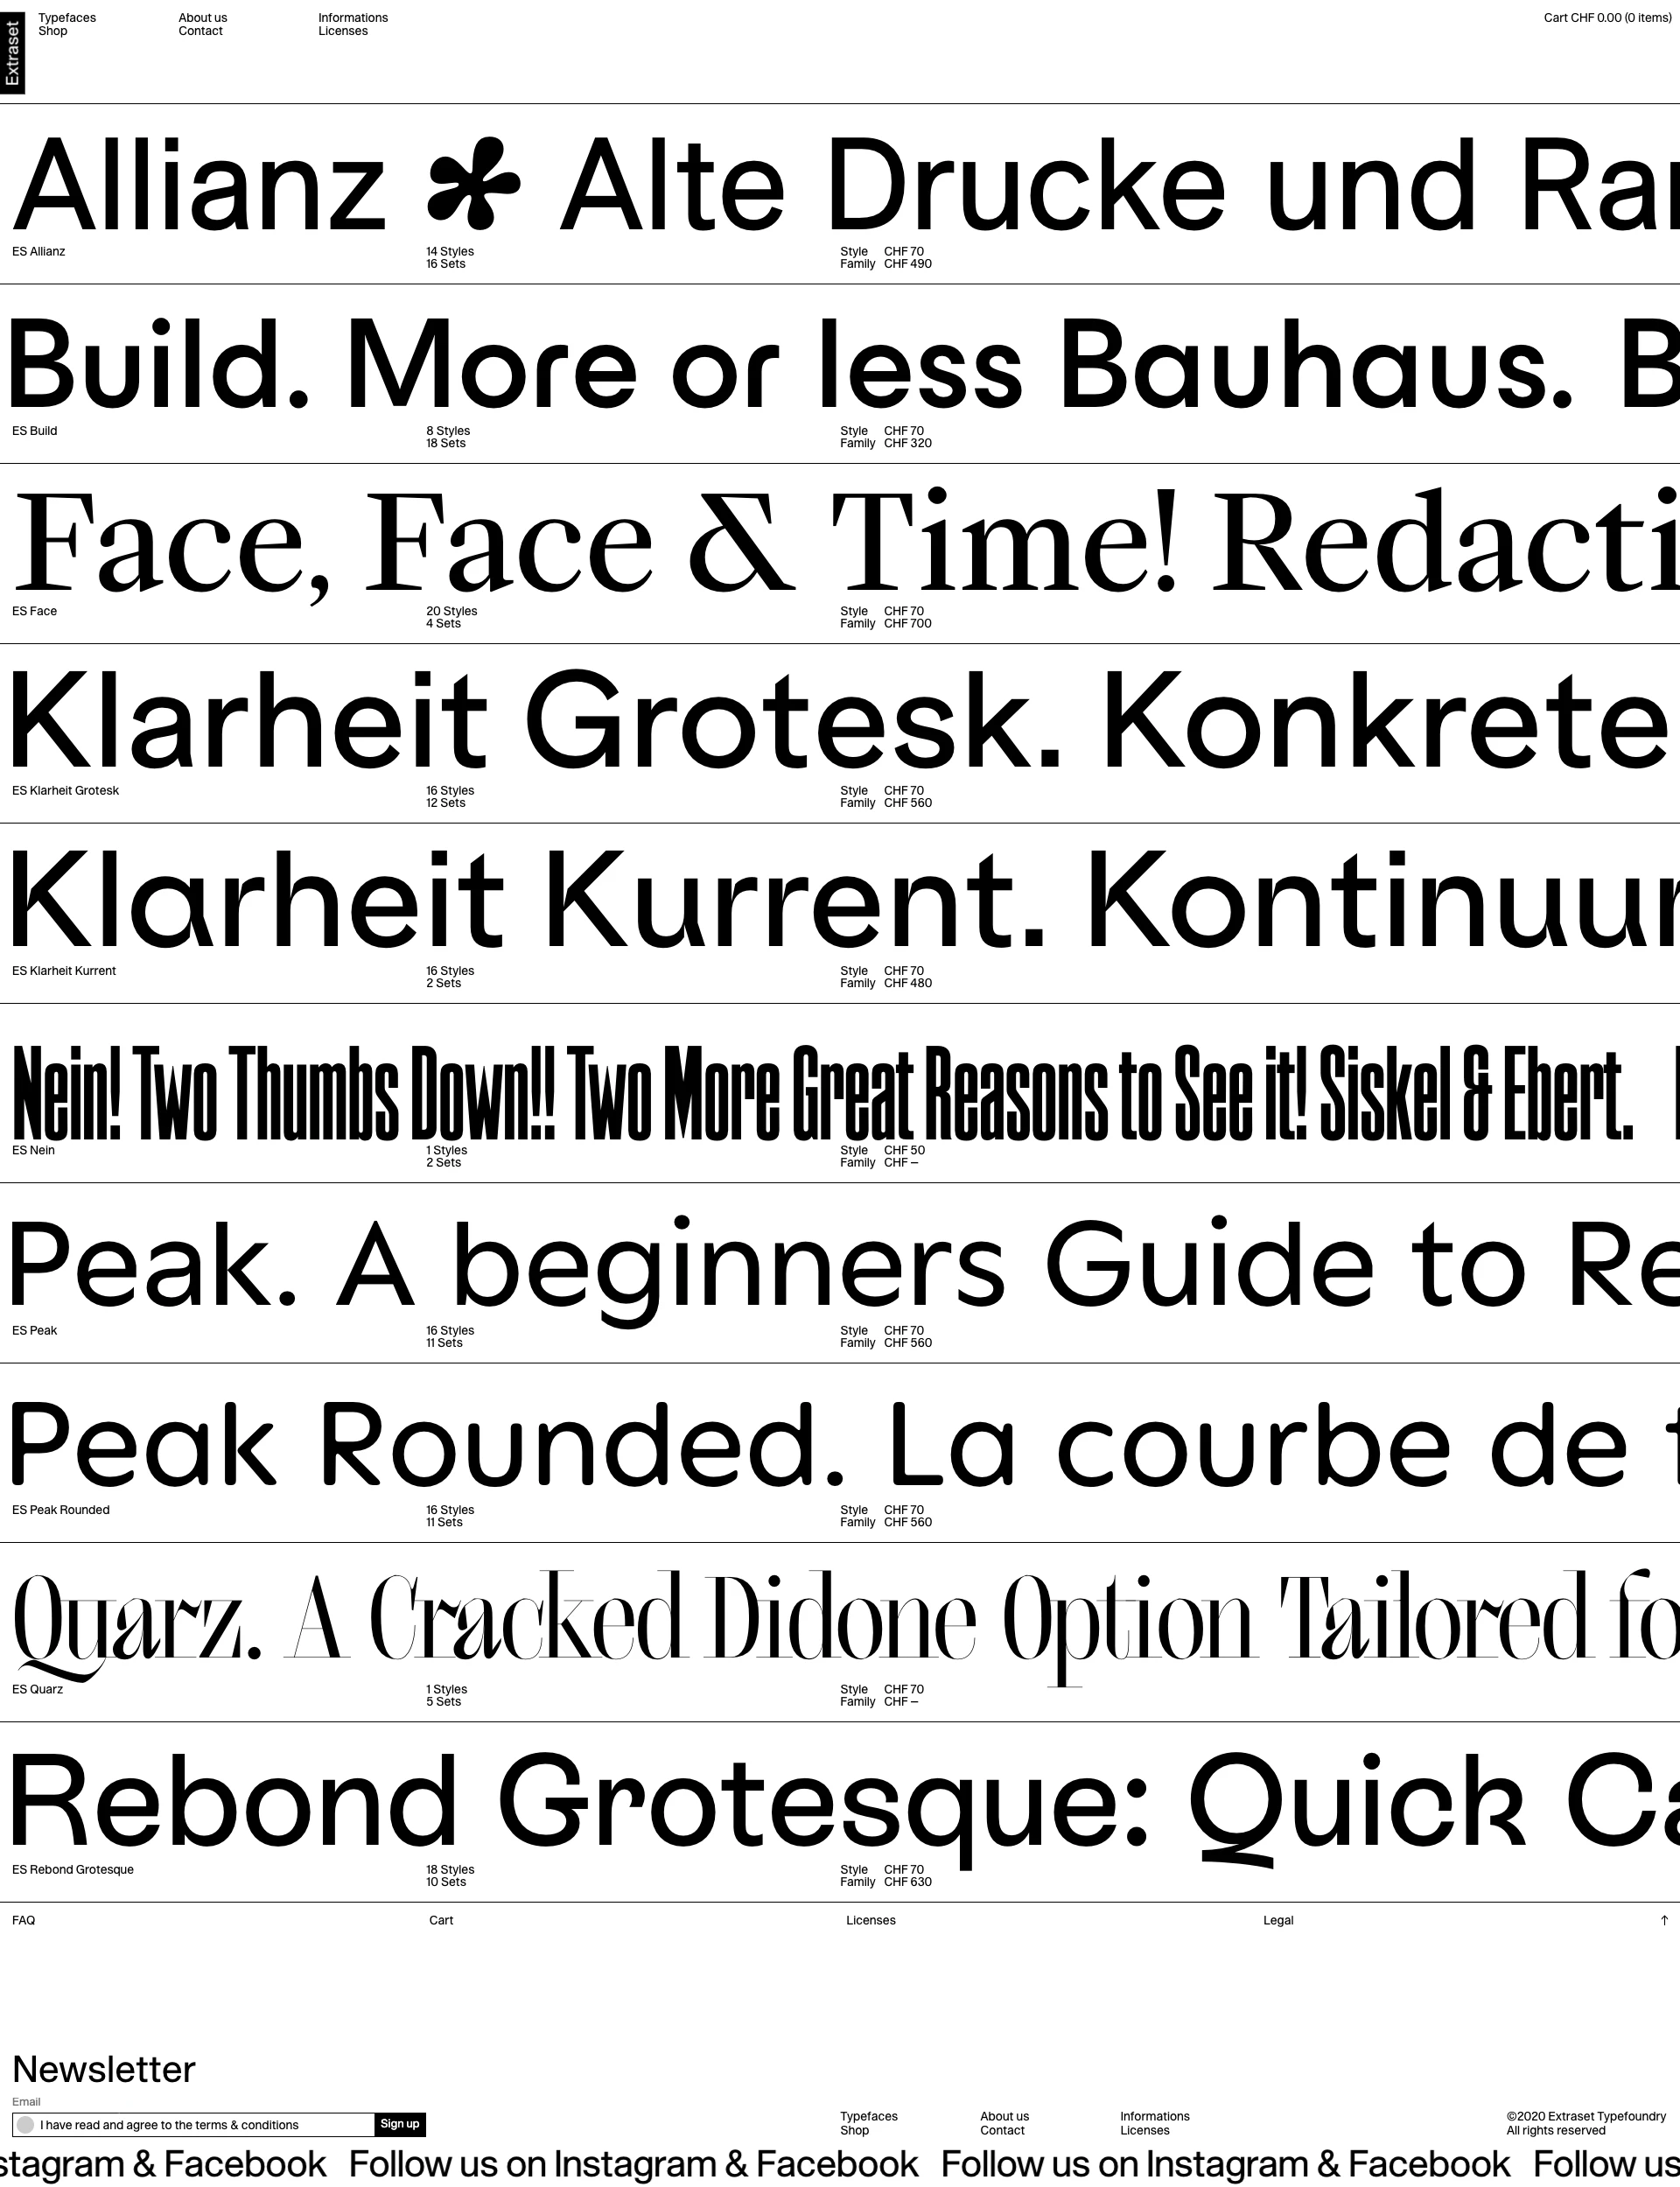 Extraset Landing Page Example: Extraset is an independent Swiss type foundry established in Geneva, jointly led by Alex Dujet (Futur Neue), Xavier Erni (Neo Neo), Roger Gaillard (Cécile + Roger) and David Mamie (TM Todeschini + Mamie). Extraset publishes professional typefaces made by graphic designers for graphic designers.